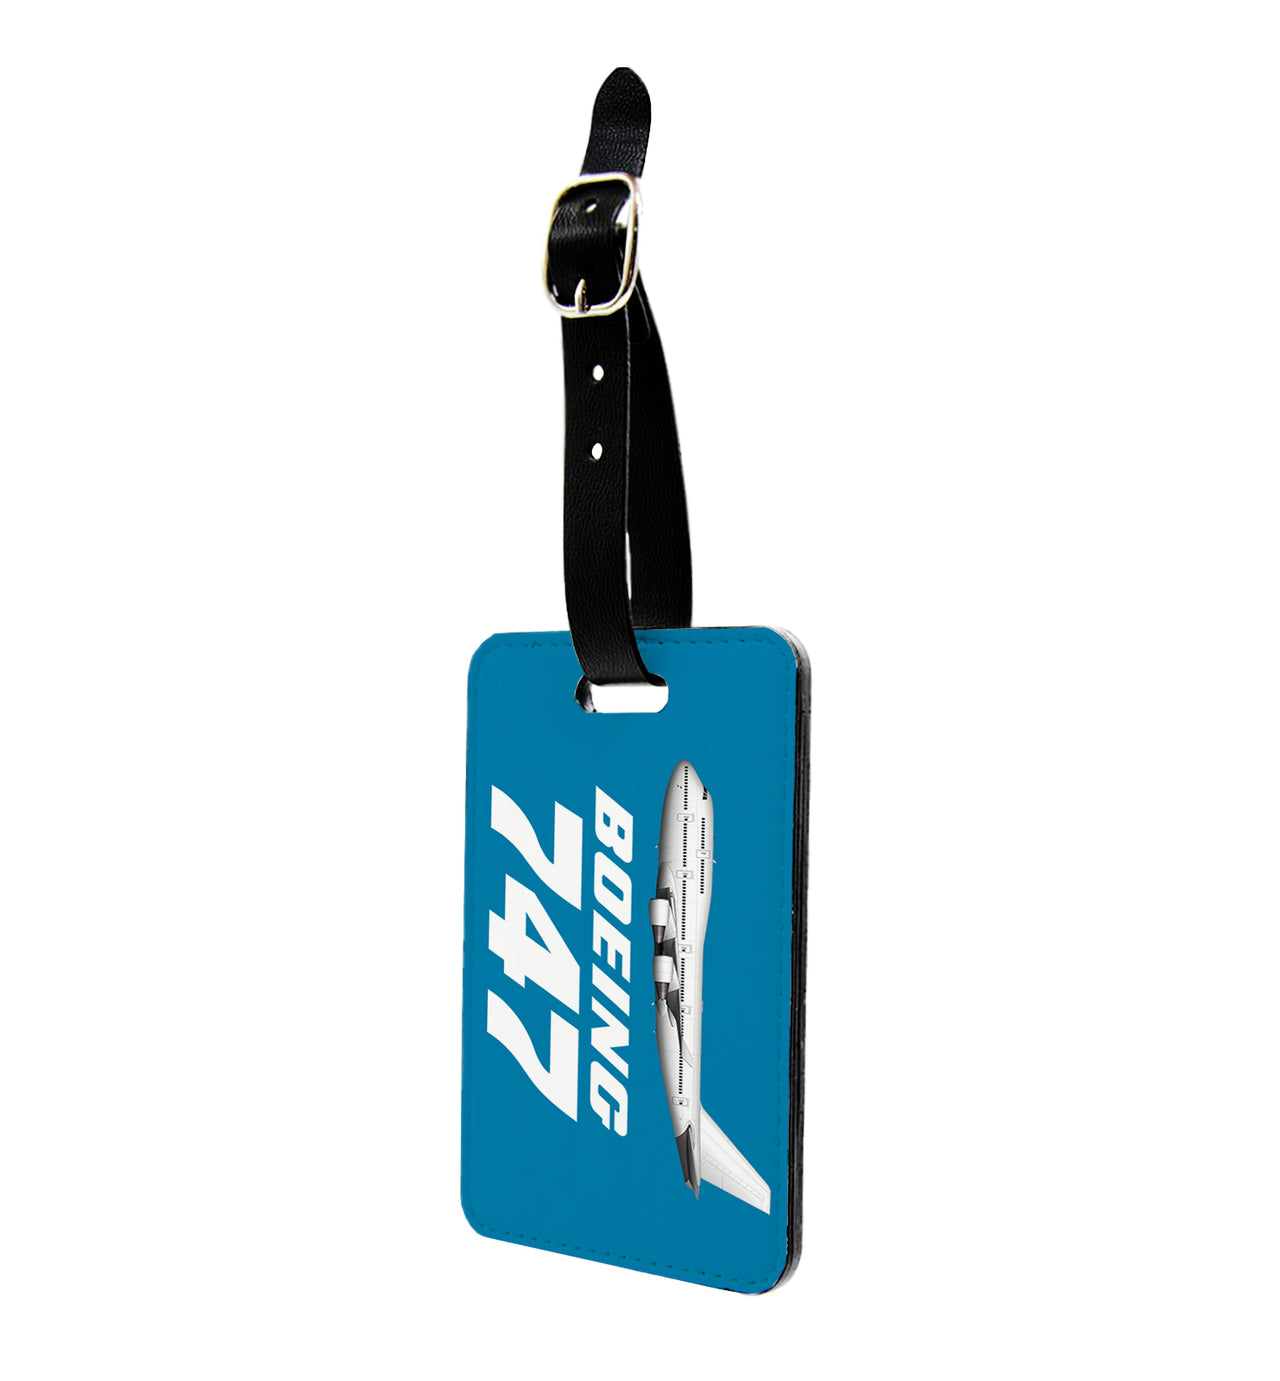 The Boeing 747 Designed Luggage Tag